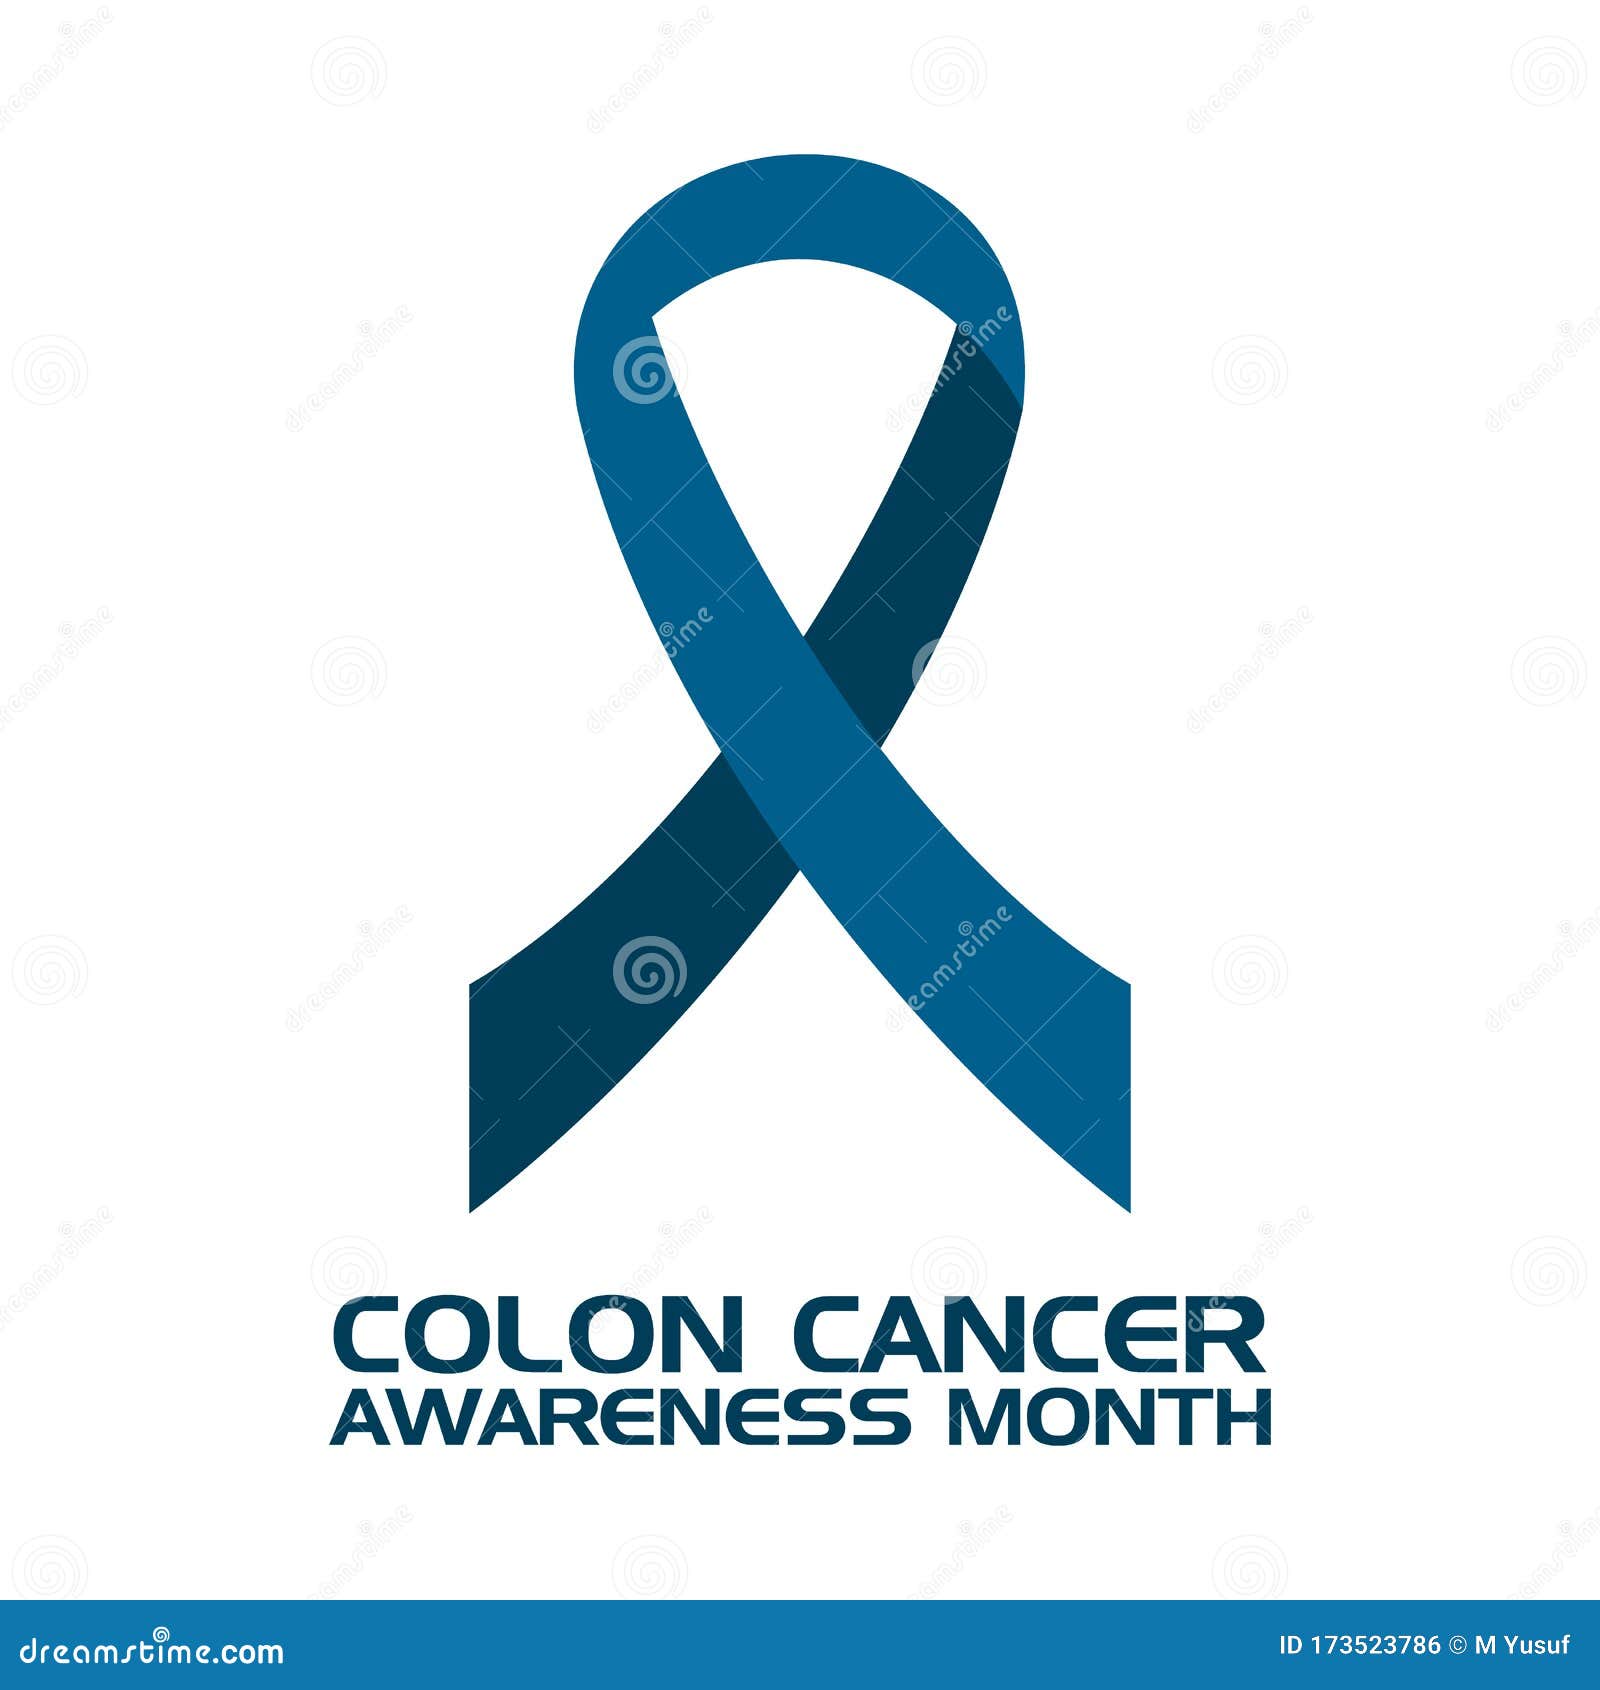 Colon Cancer Awareness Month Realistic Blue Vector Image Stock Vector ...